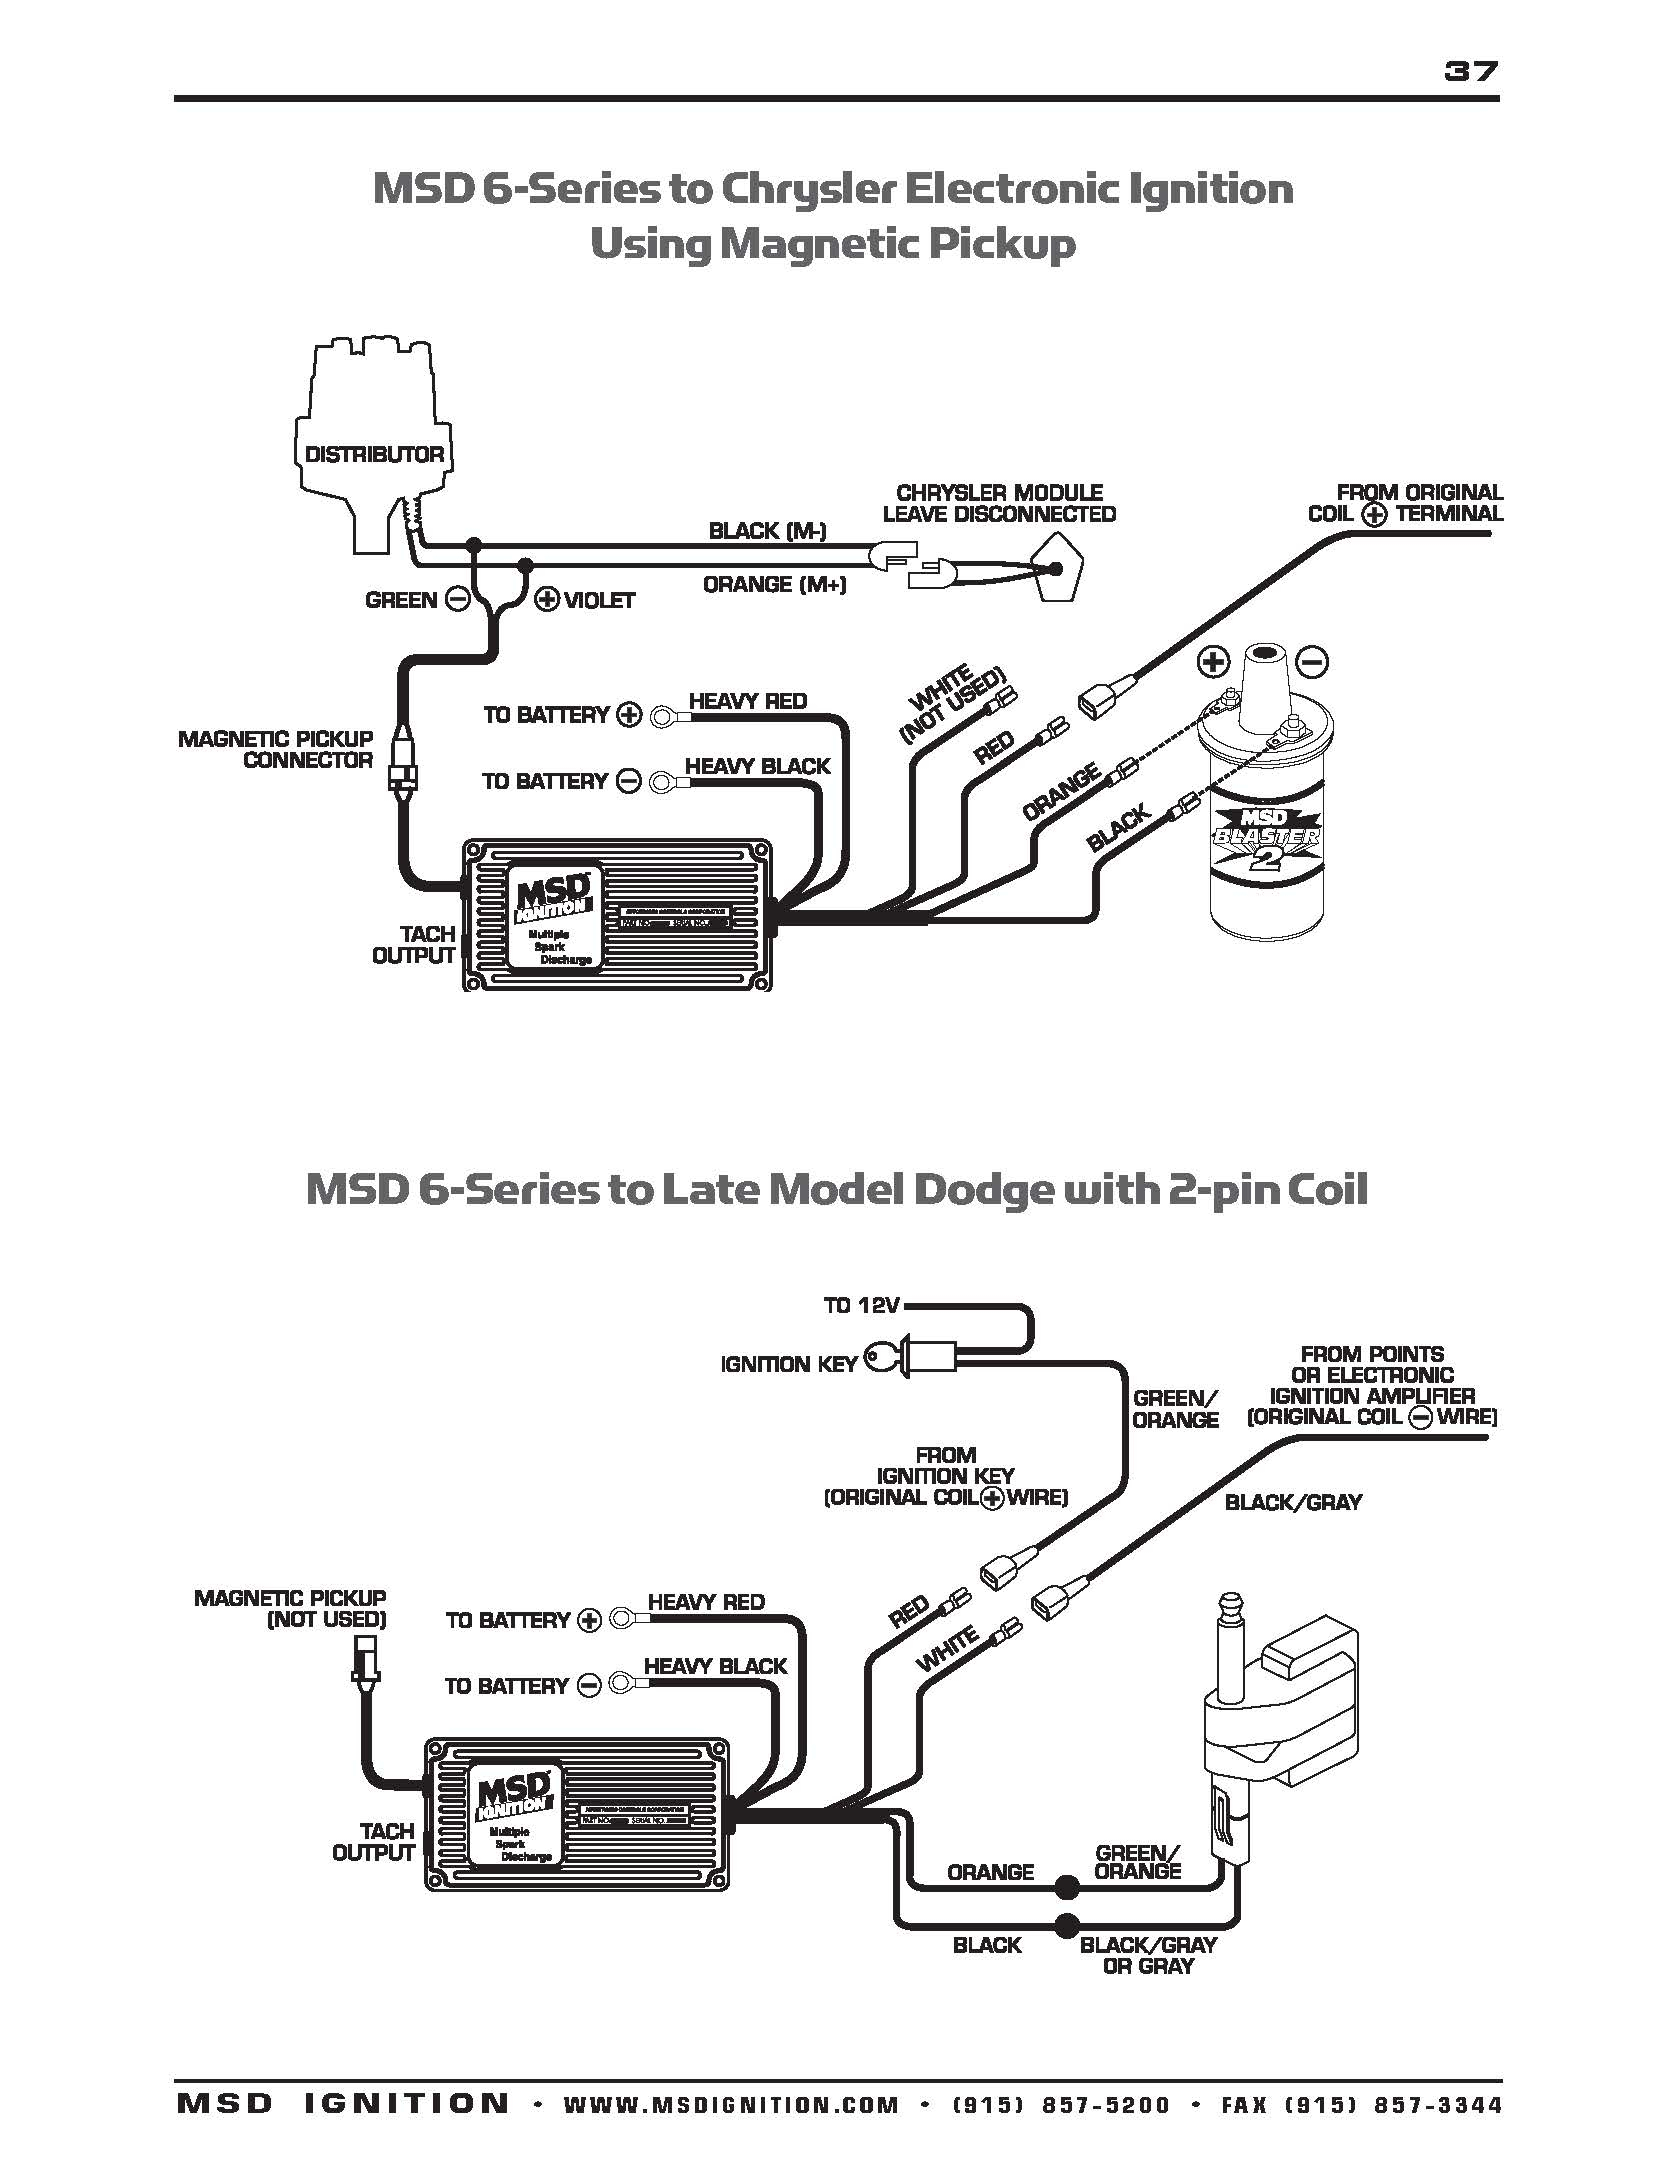 Msd Wiring Diagrams – Brianesser - Ford Ignition Coil Wiring Diagram